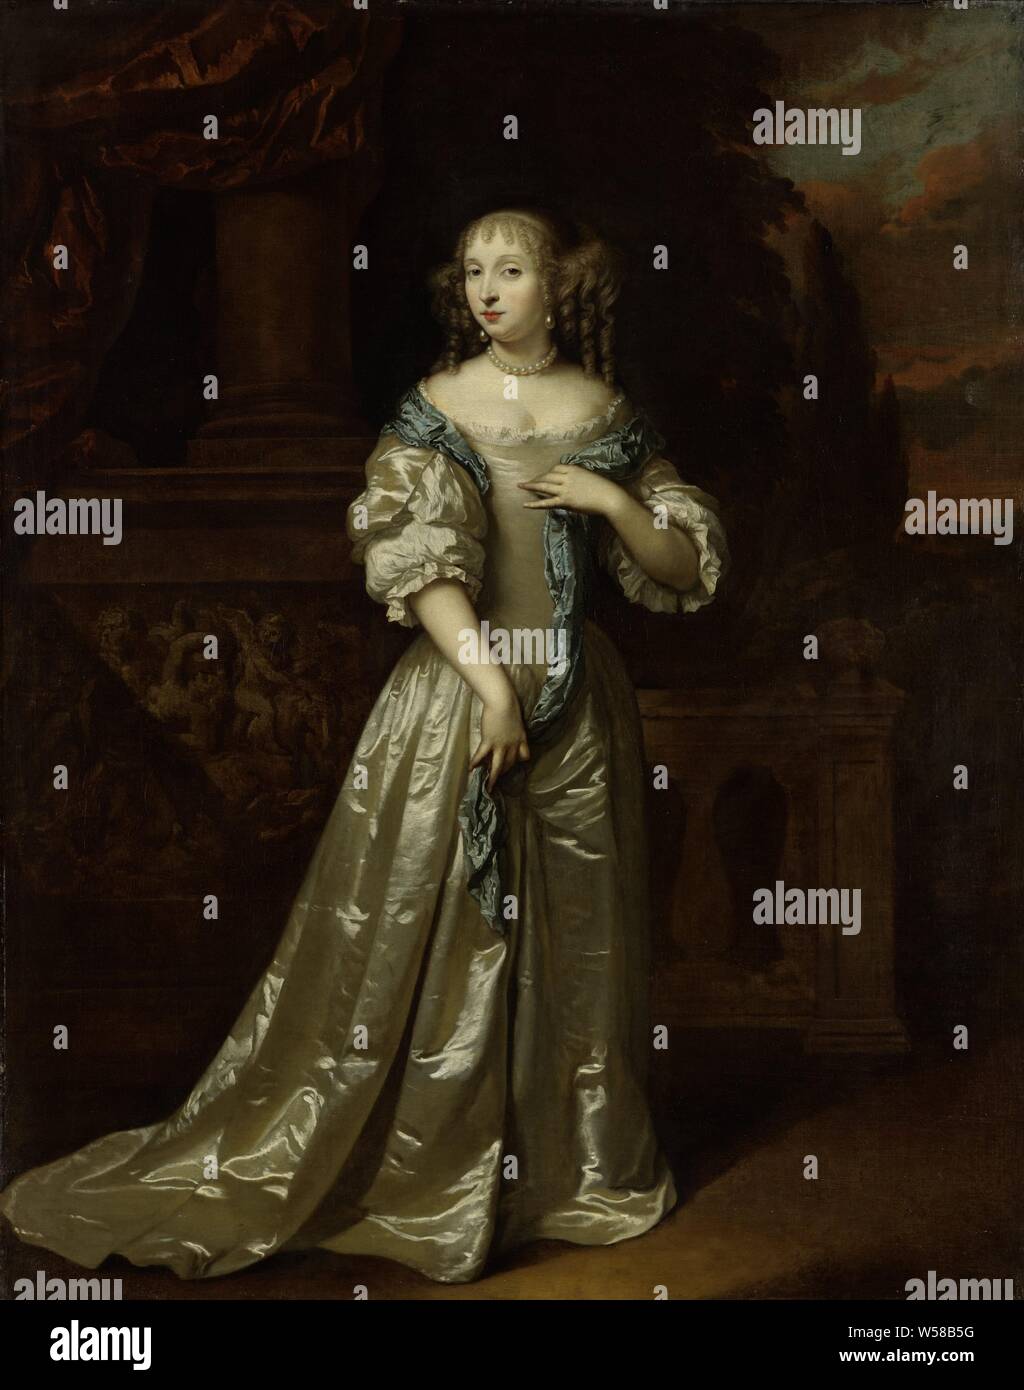 Portrait of Philippina Staunton, Wife or Roelof van Arkel (1632-1709), Lord of Broeckhuijsen, Portrait of Lady Philippina Staunton (died 1723), wife of Roelof van Arkel, lord of Broeckhuijsen. Standing full-length in front of a balustrade overlooking a garden. On the left a relief with putti and other figures., Caspar Netscher, 1668, canvas, oil paint (paint), h 87 cm × w 69 cm d 8.5 cm Stock Photo